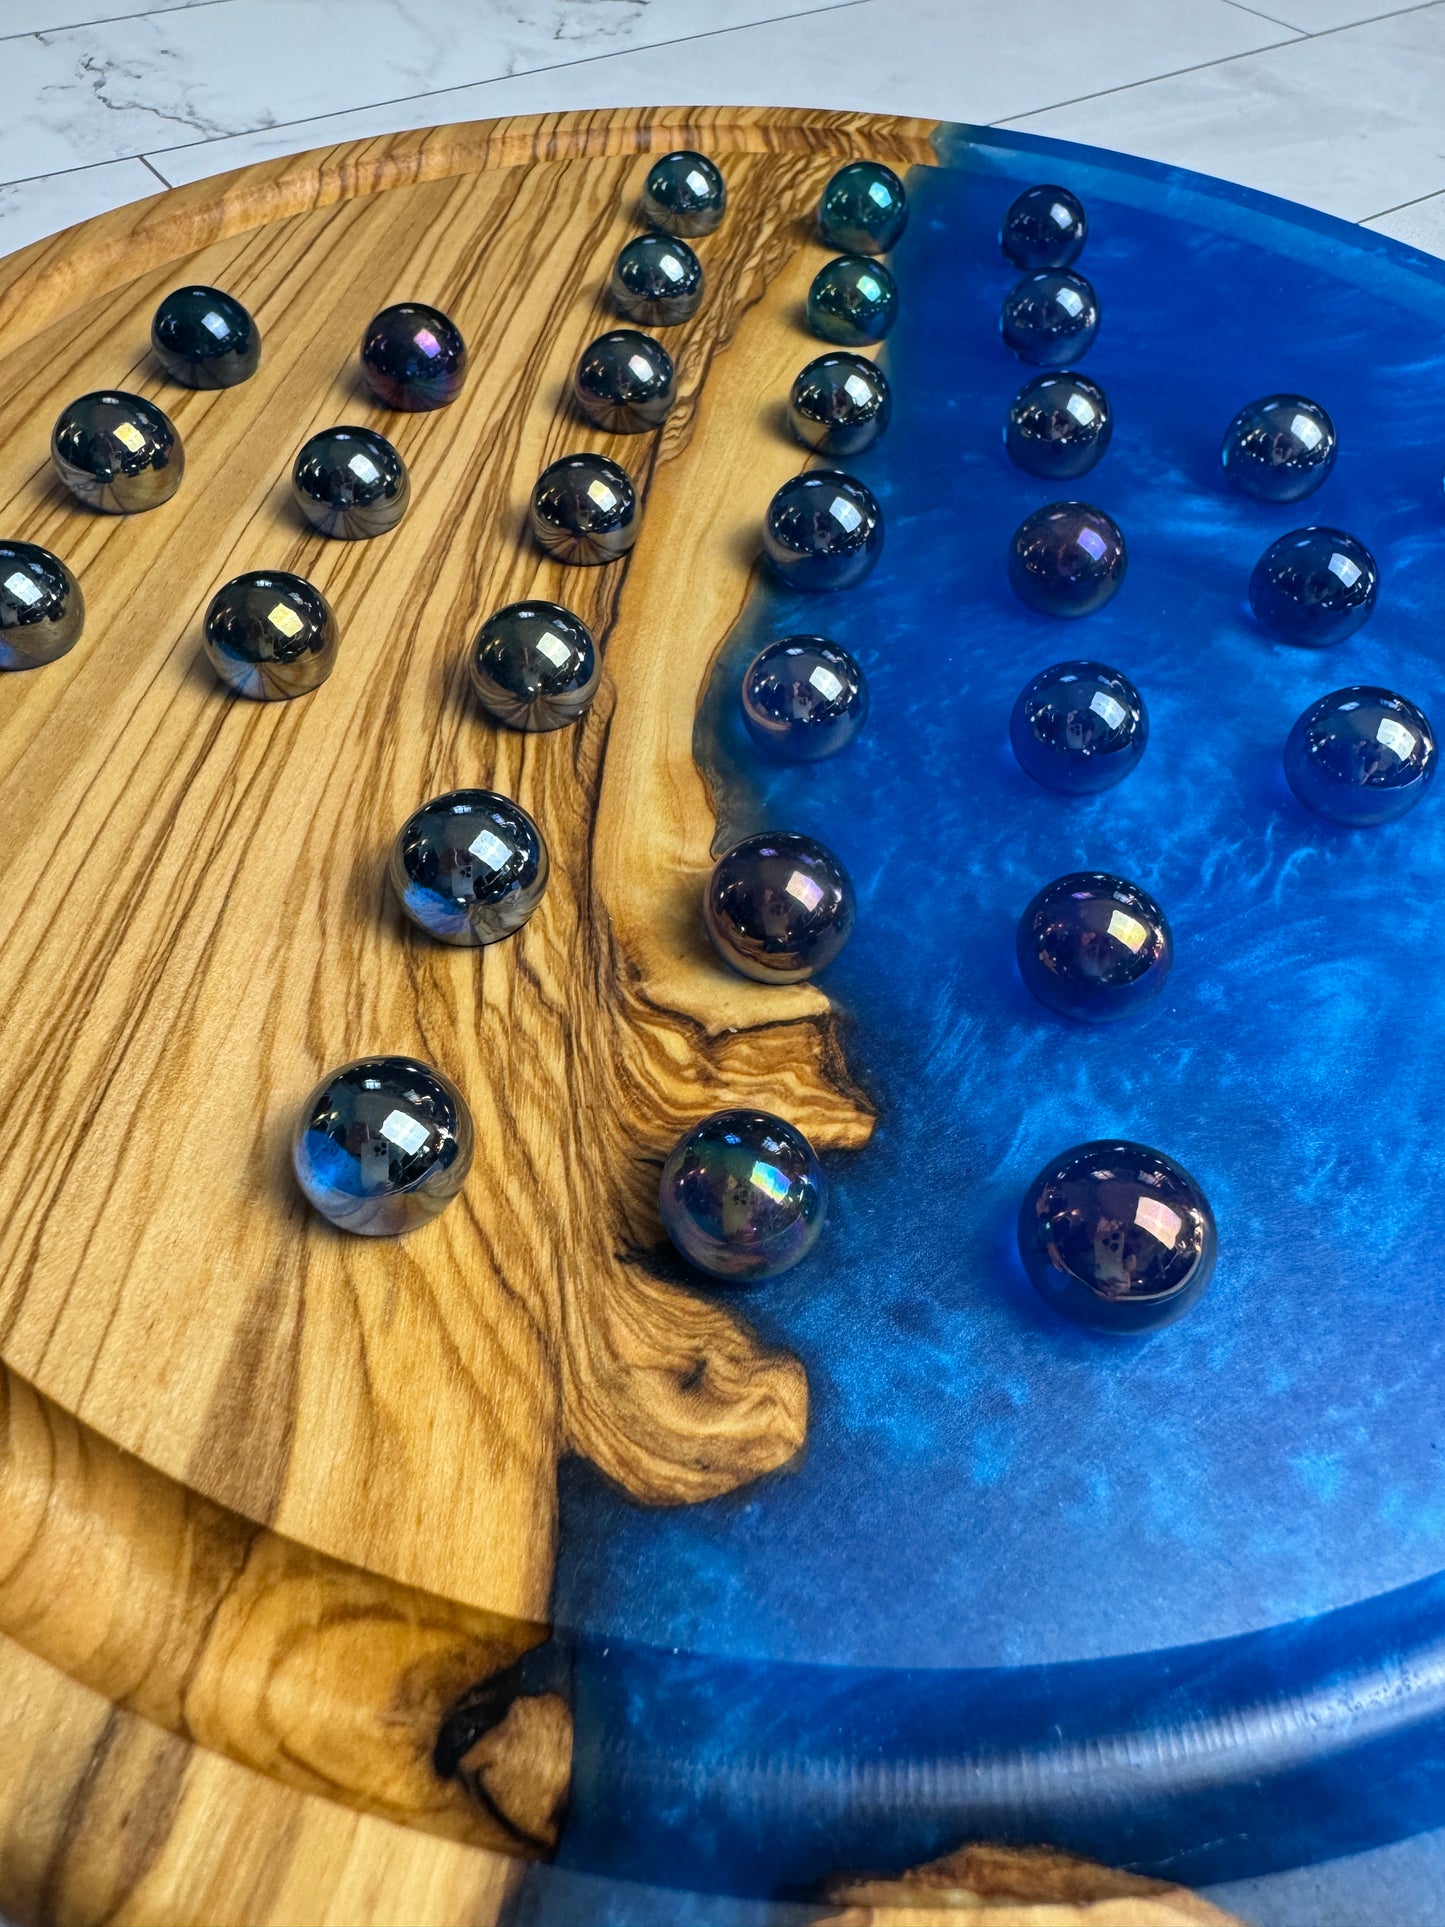 Deluxe Solitaire Board - Olive wood and blue resin